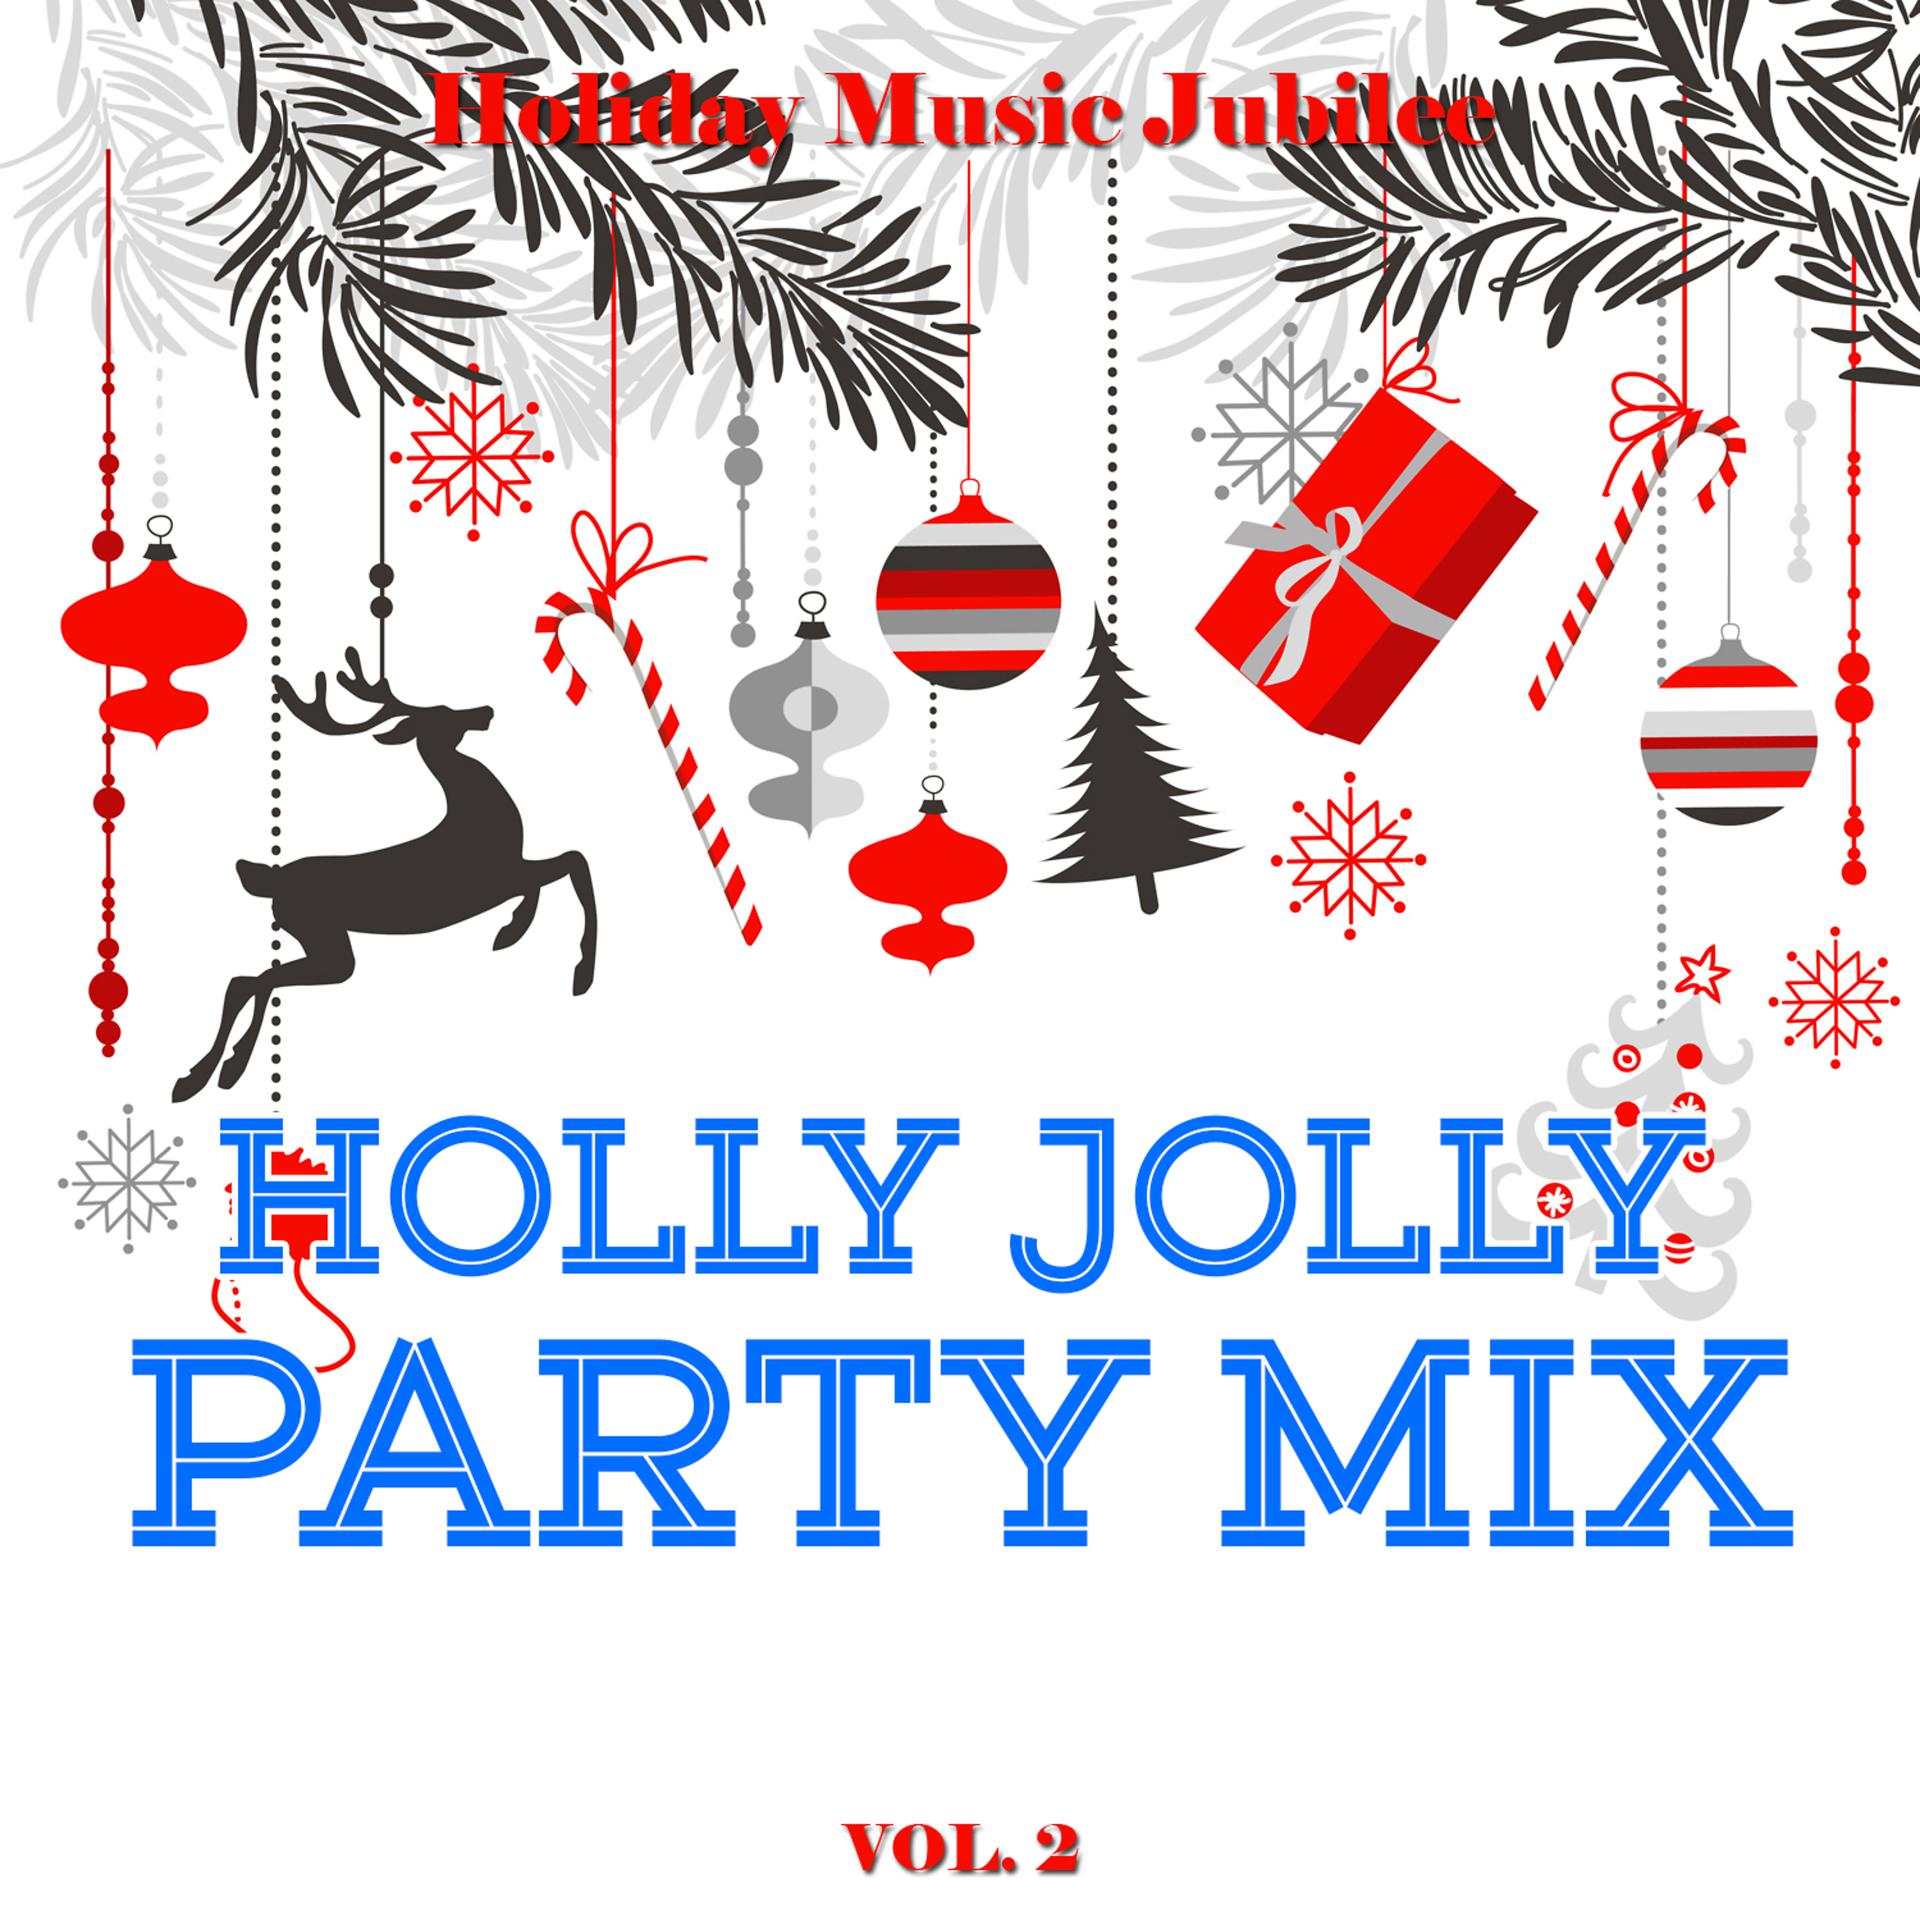 Постер альбома Holiday Music Jubilee: Holly Jolly Party Mix, Vol. 2